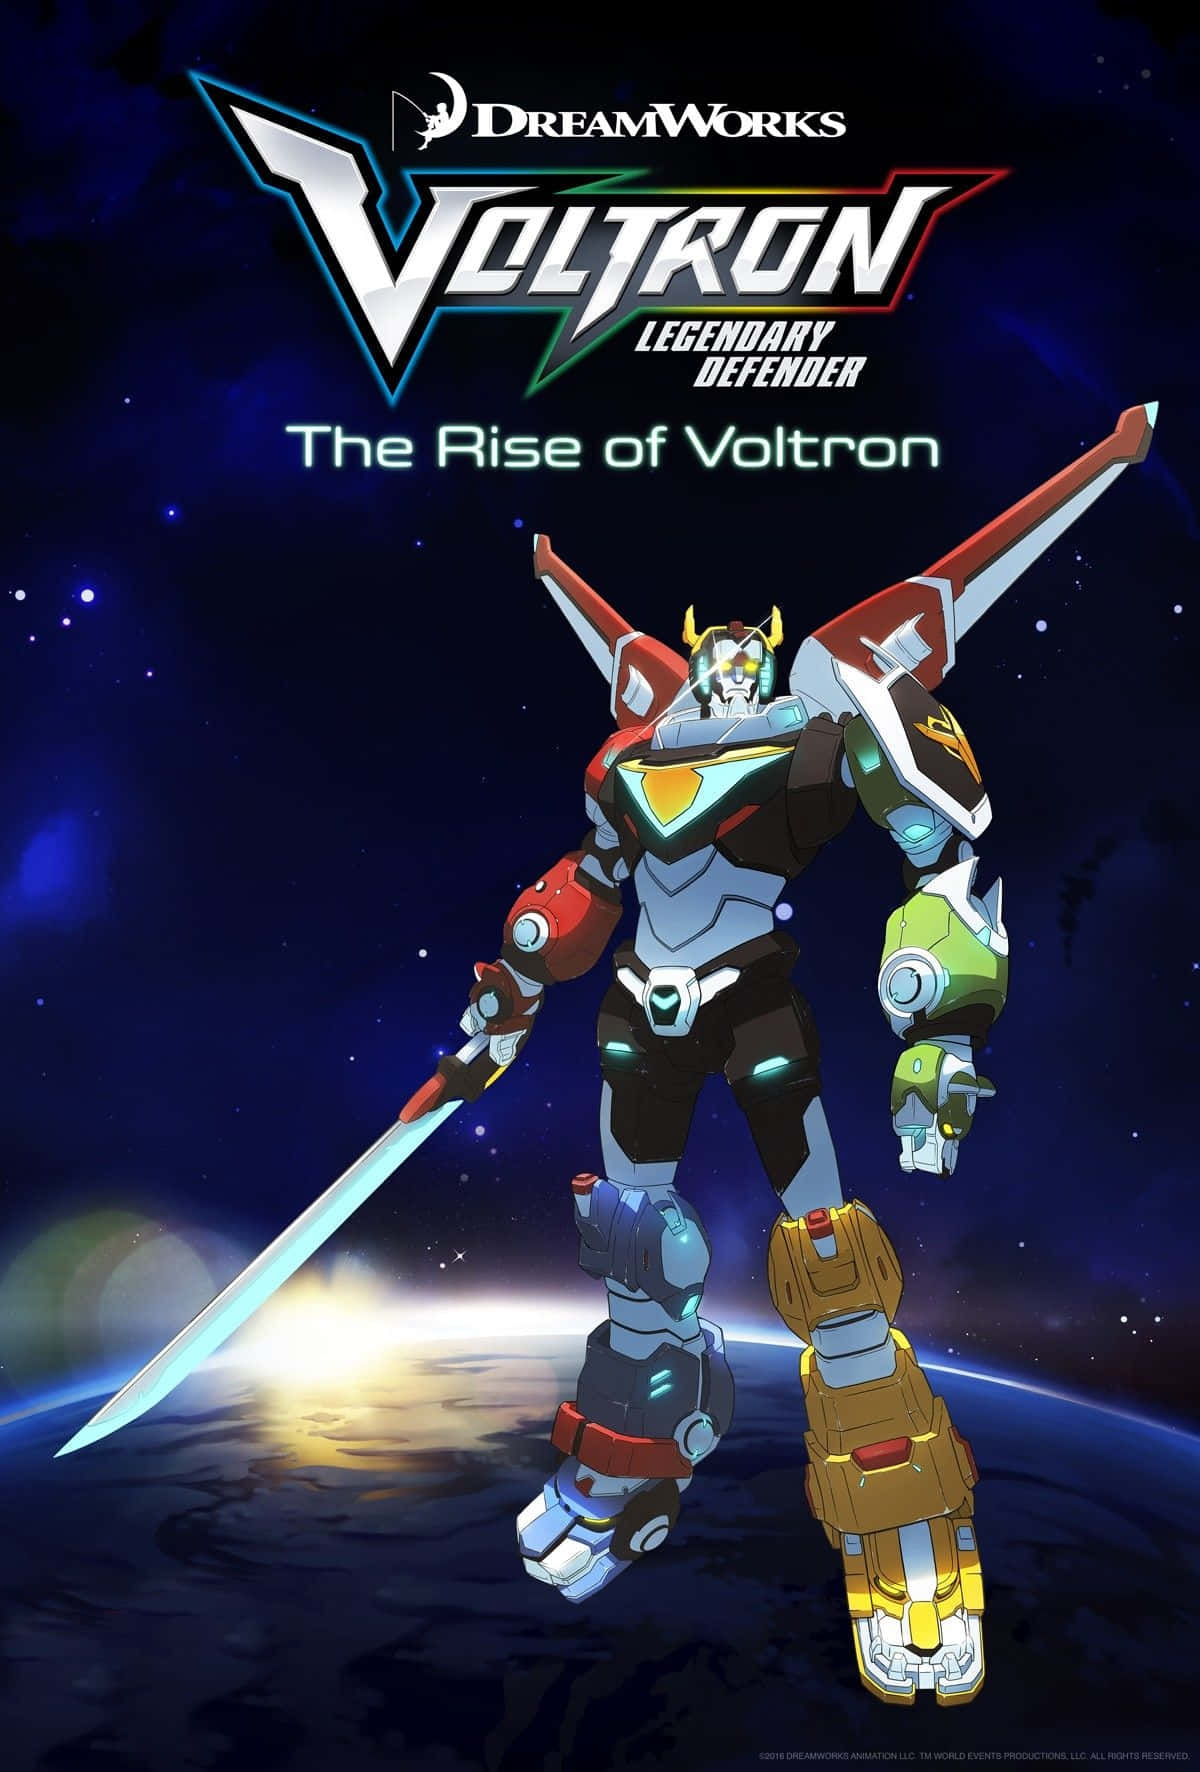 The Heroic Voltron Defends The Universe Background